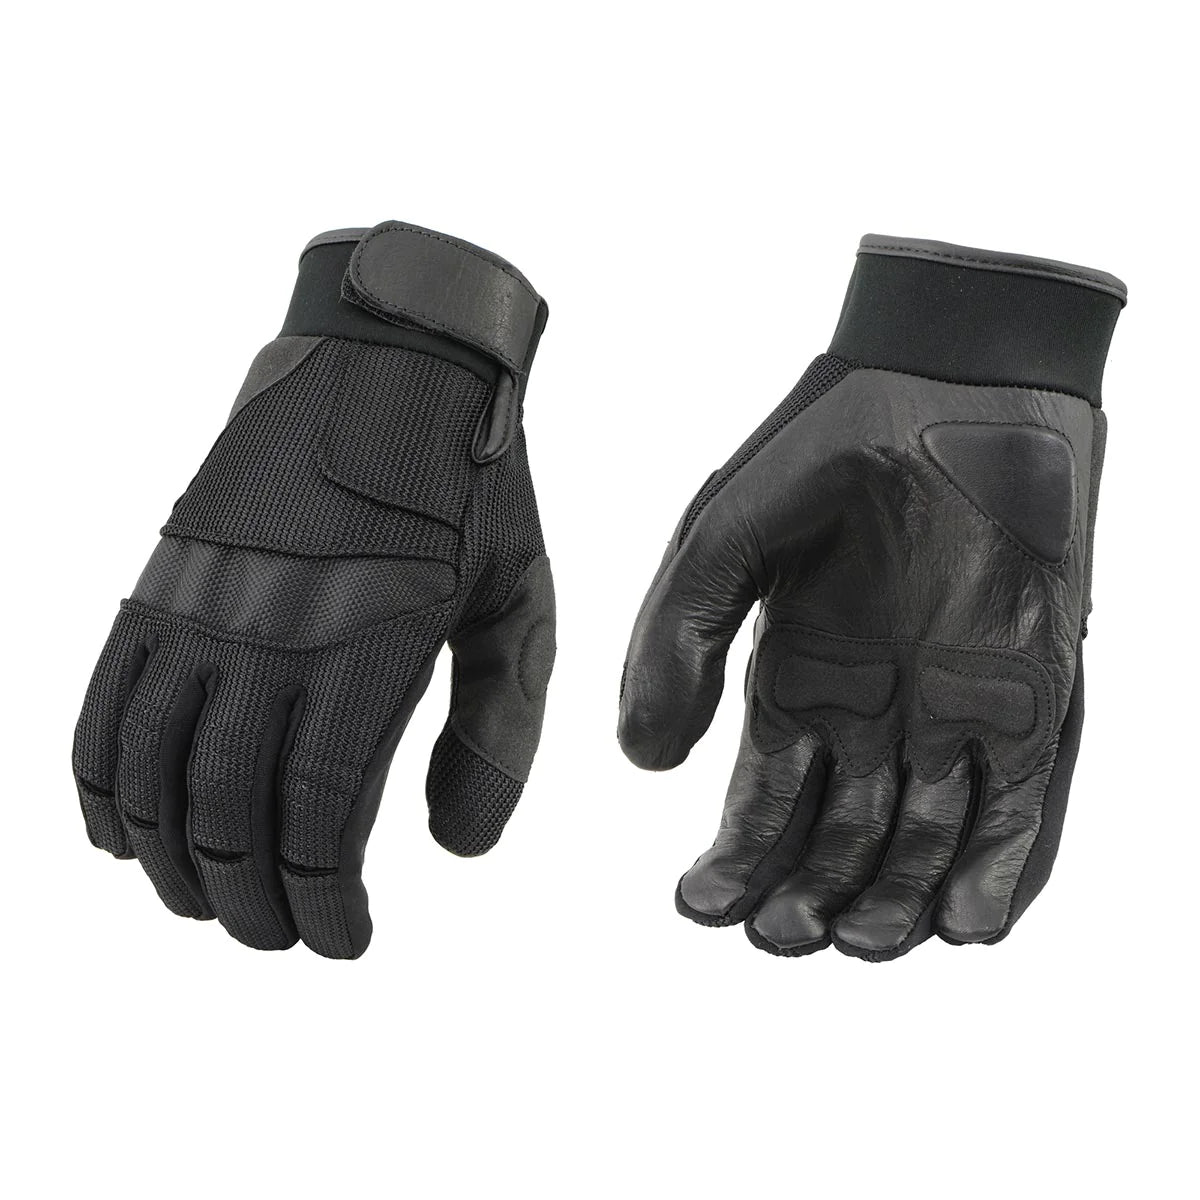 Men's Black Mesh and Leather Racing Gloves